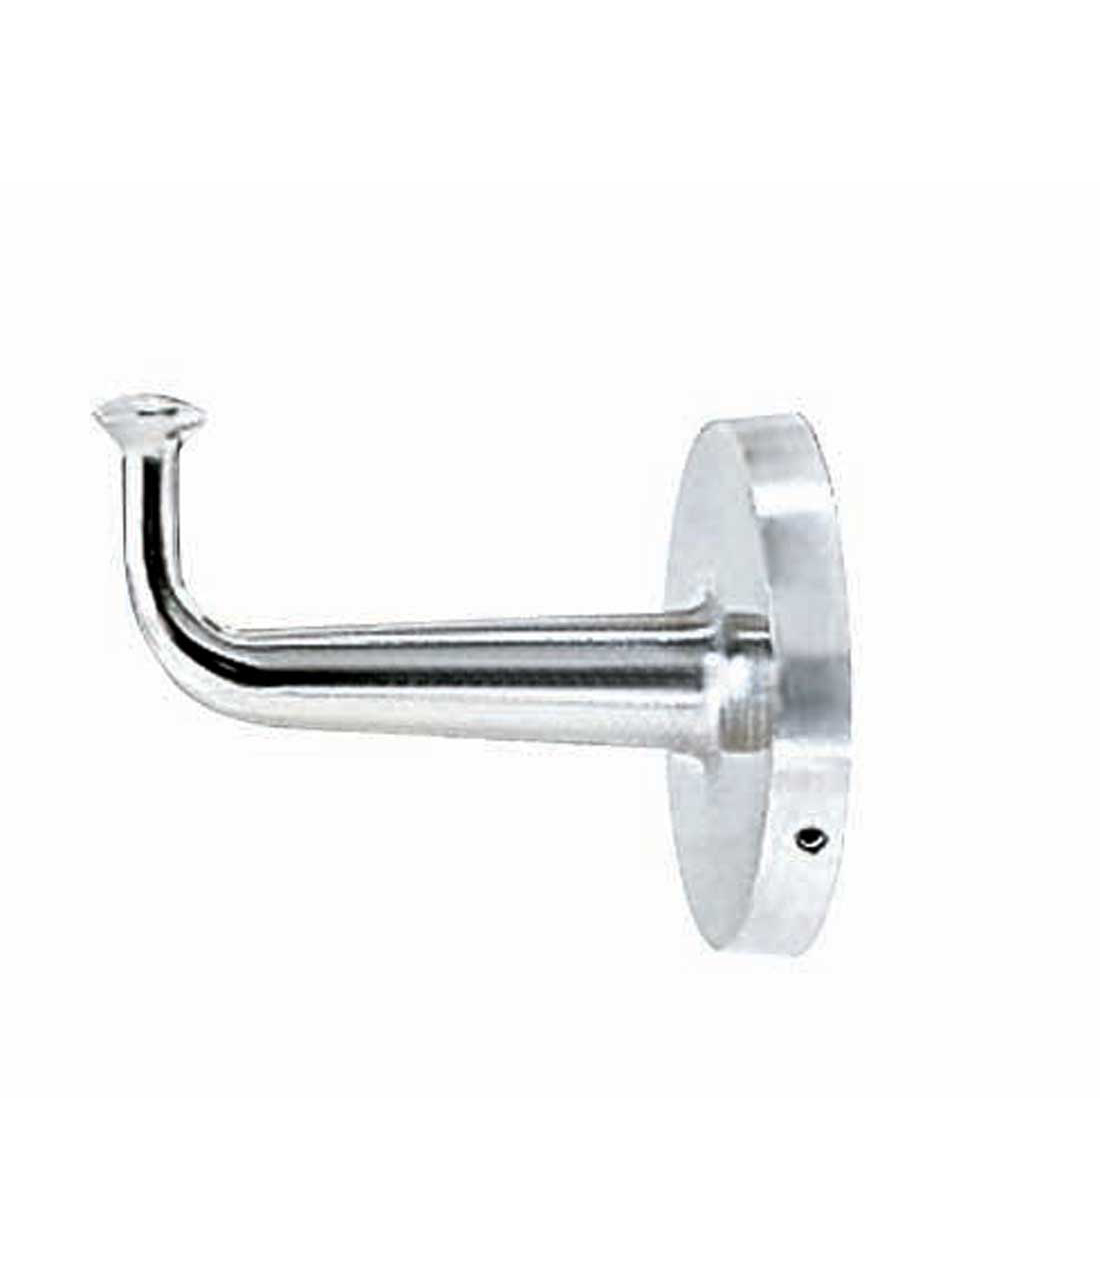 Heavy-Duty Clothes Hook with Concealed Mounting Image